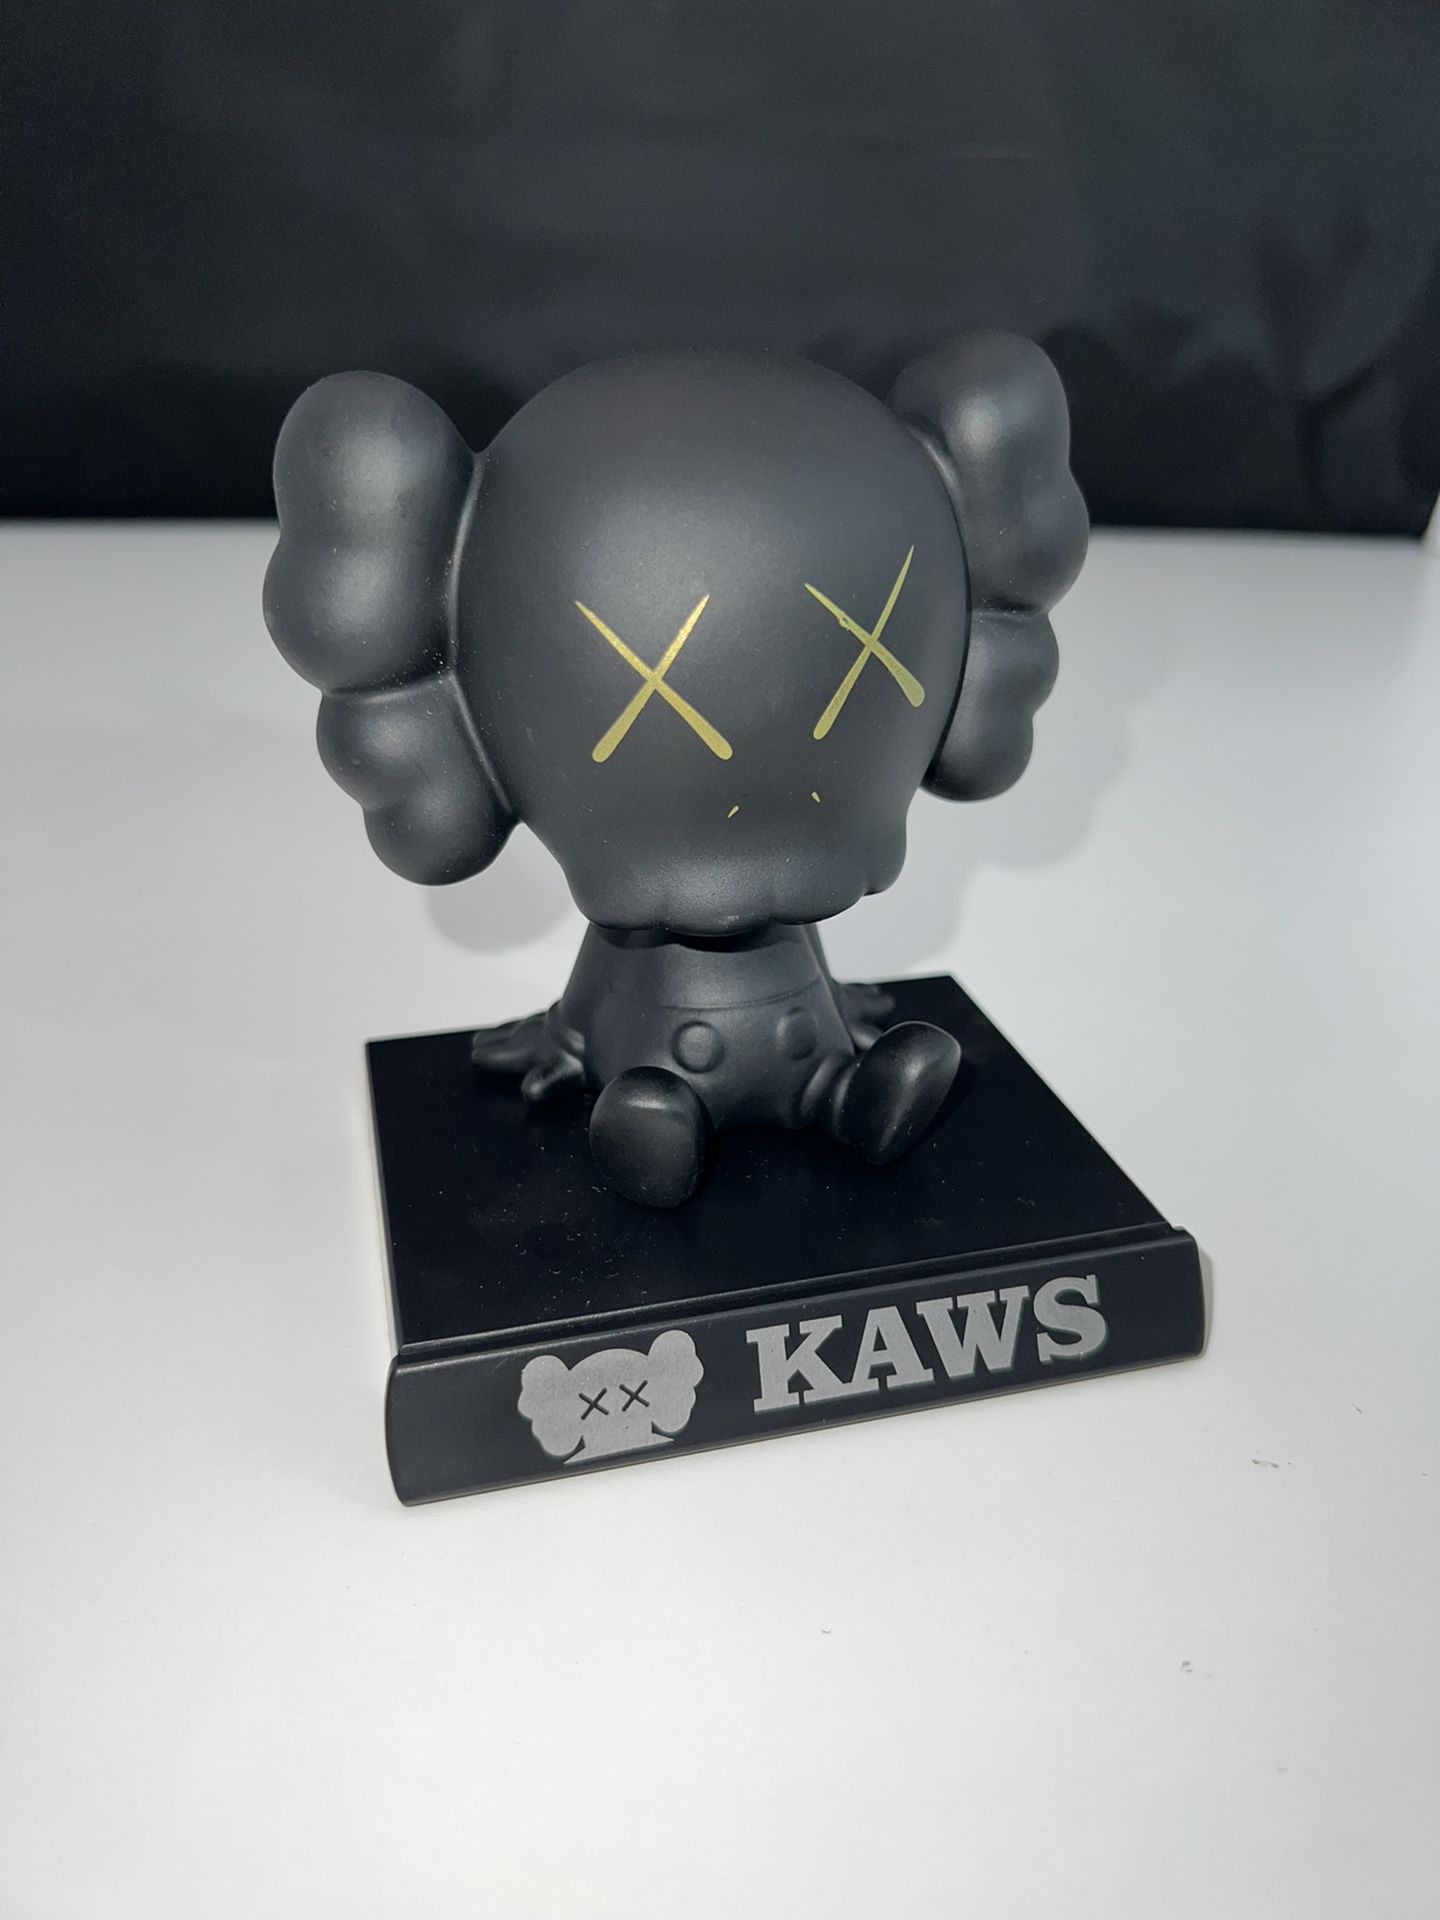 KAWS Inspired Sculpture Bear Figure Collectibles Building Blocks Small, Home Decoration, Model Toy Unique Present Gift - Black